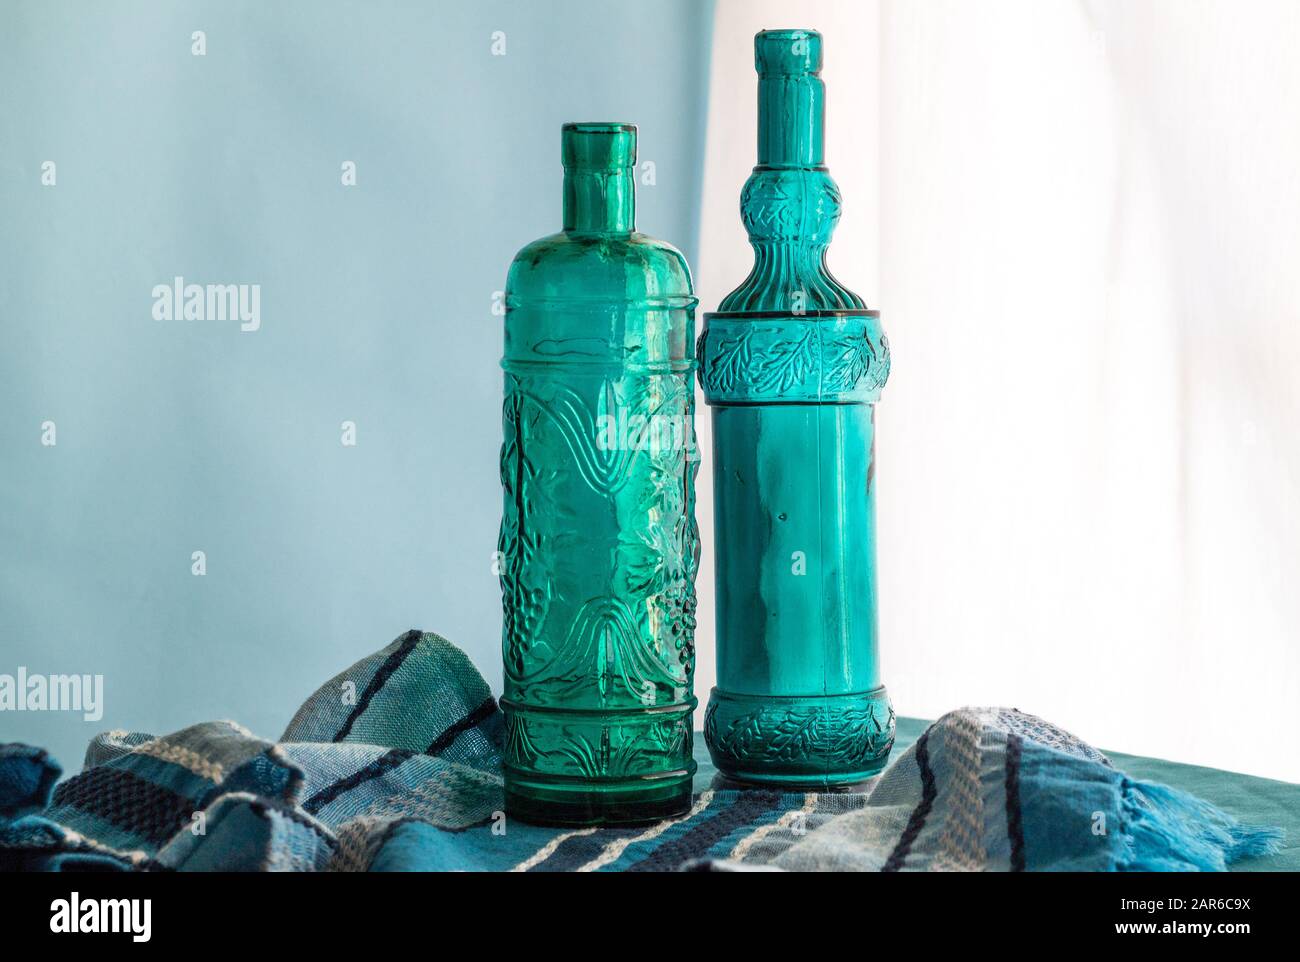 Wine bottle still life with two hand crafted blue glass  decorated bottles made of recycled Spanish glass in front of window - horizontal image with s Stock Photo